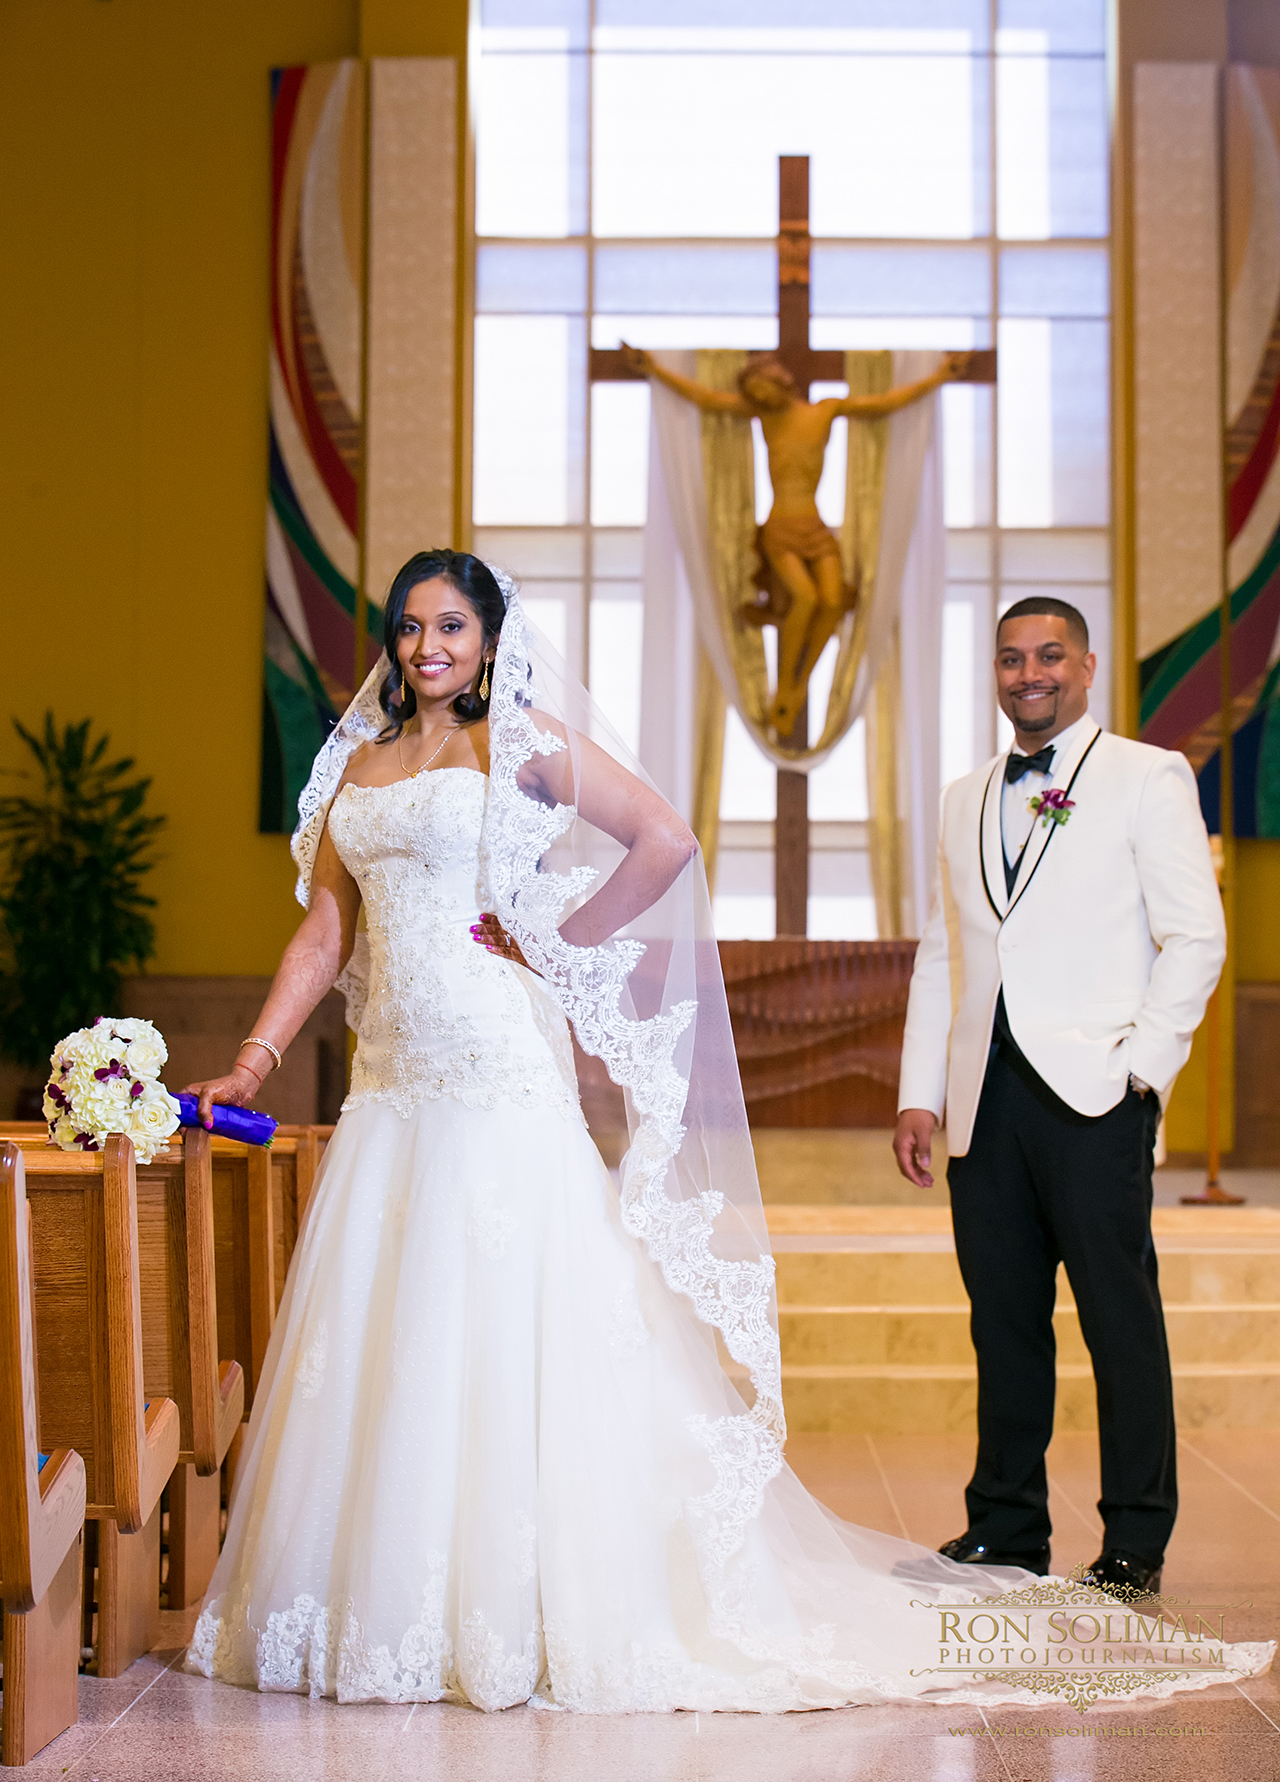 wedding photos at Christ our light catholic church in Cherry Hill, new jersey